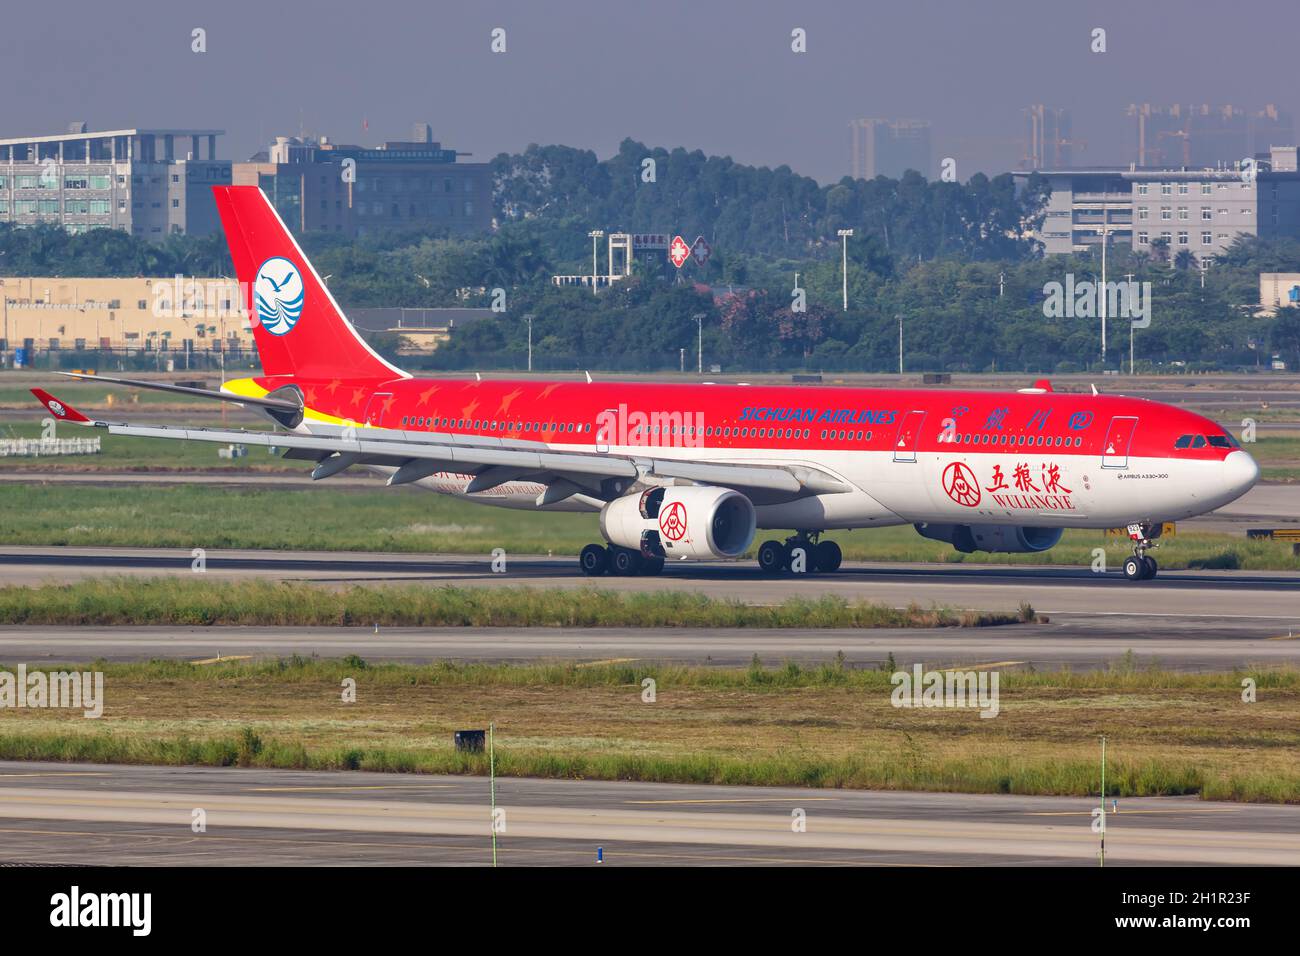 Guangzhou, China - September 24, 2019: Sichuan Airlines Airbus A330-300 airplane with Wuliangye special colors at Guangzhou Baiyun Airport (CAN) in Ch Stock Photo